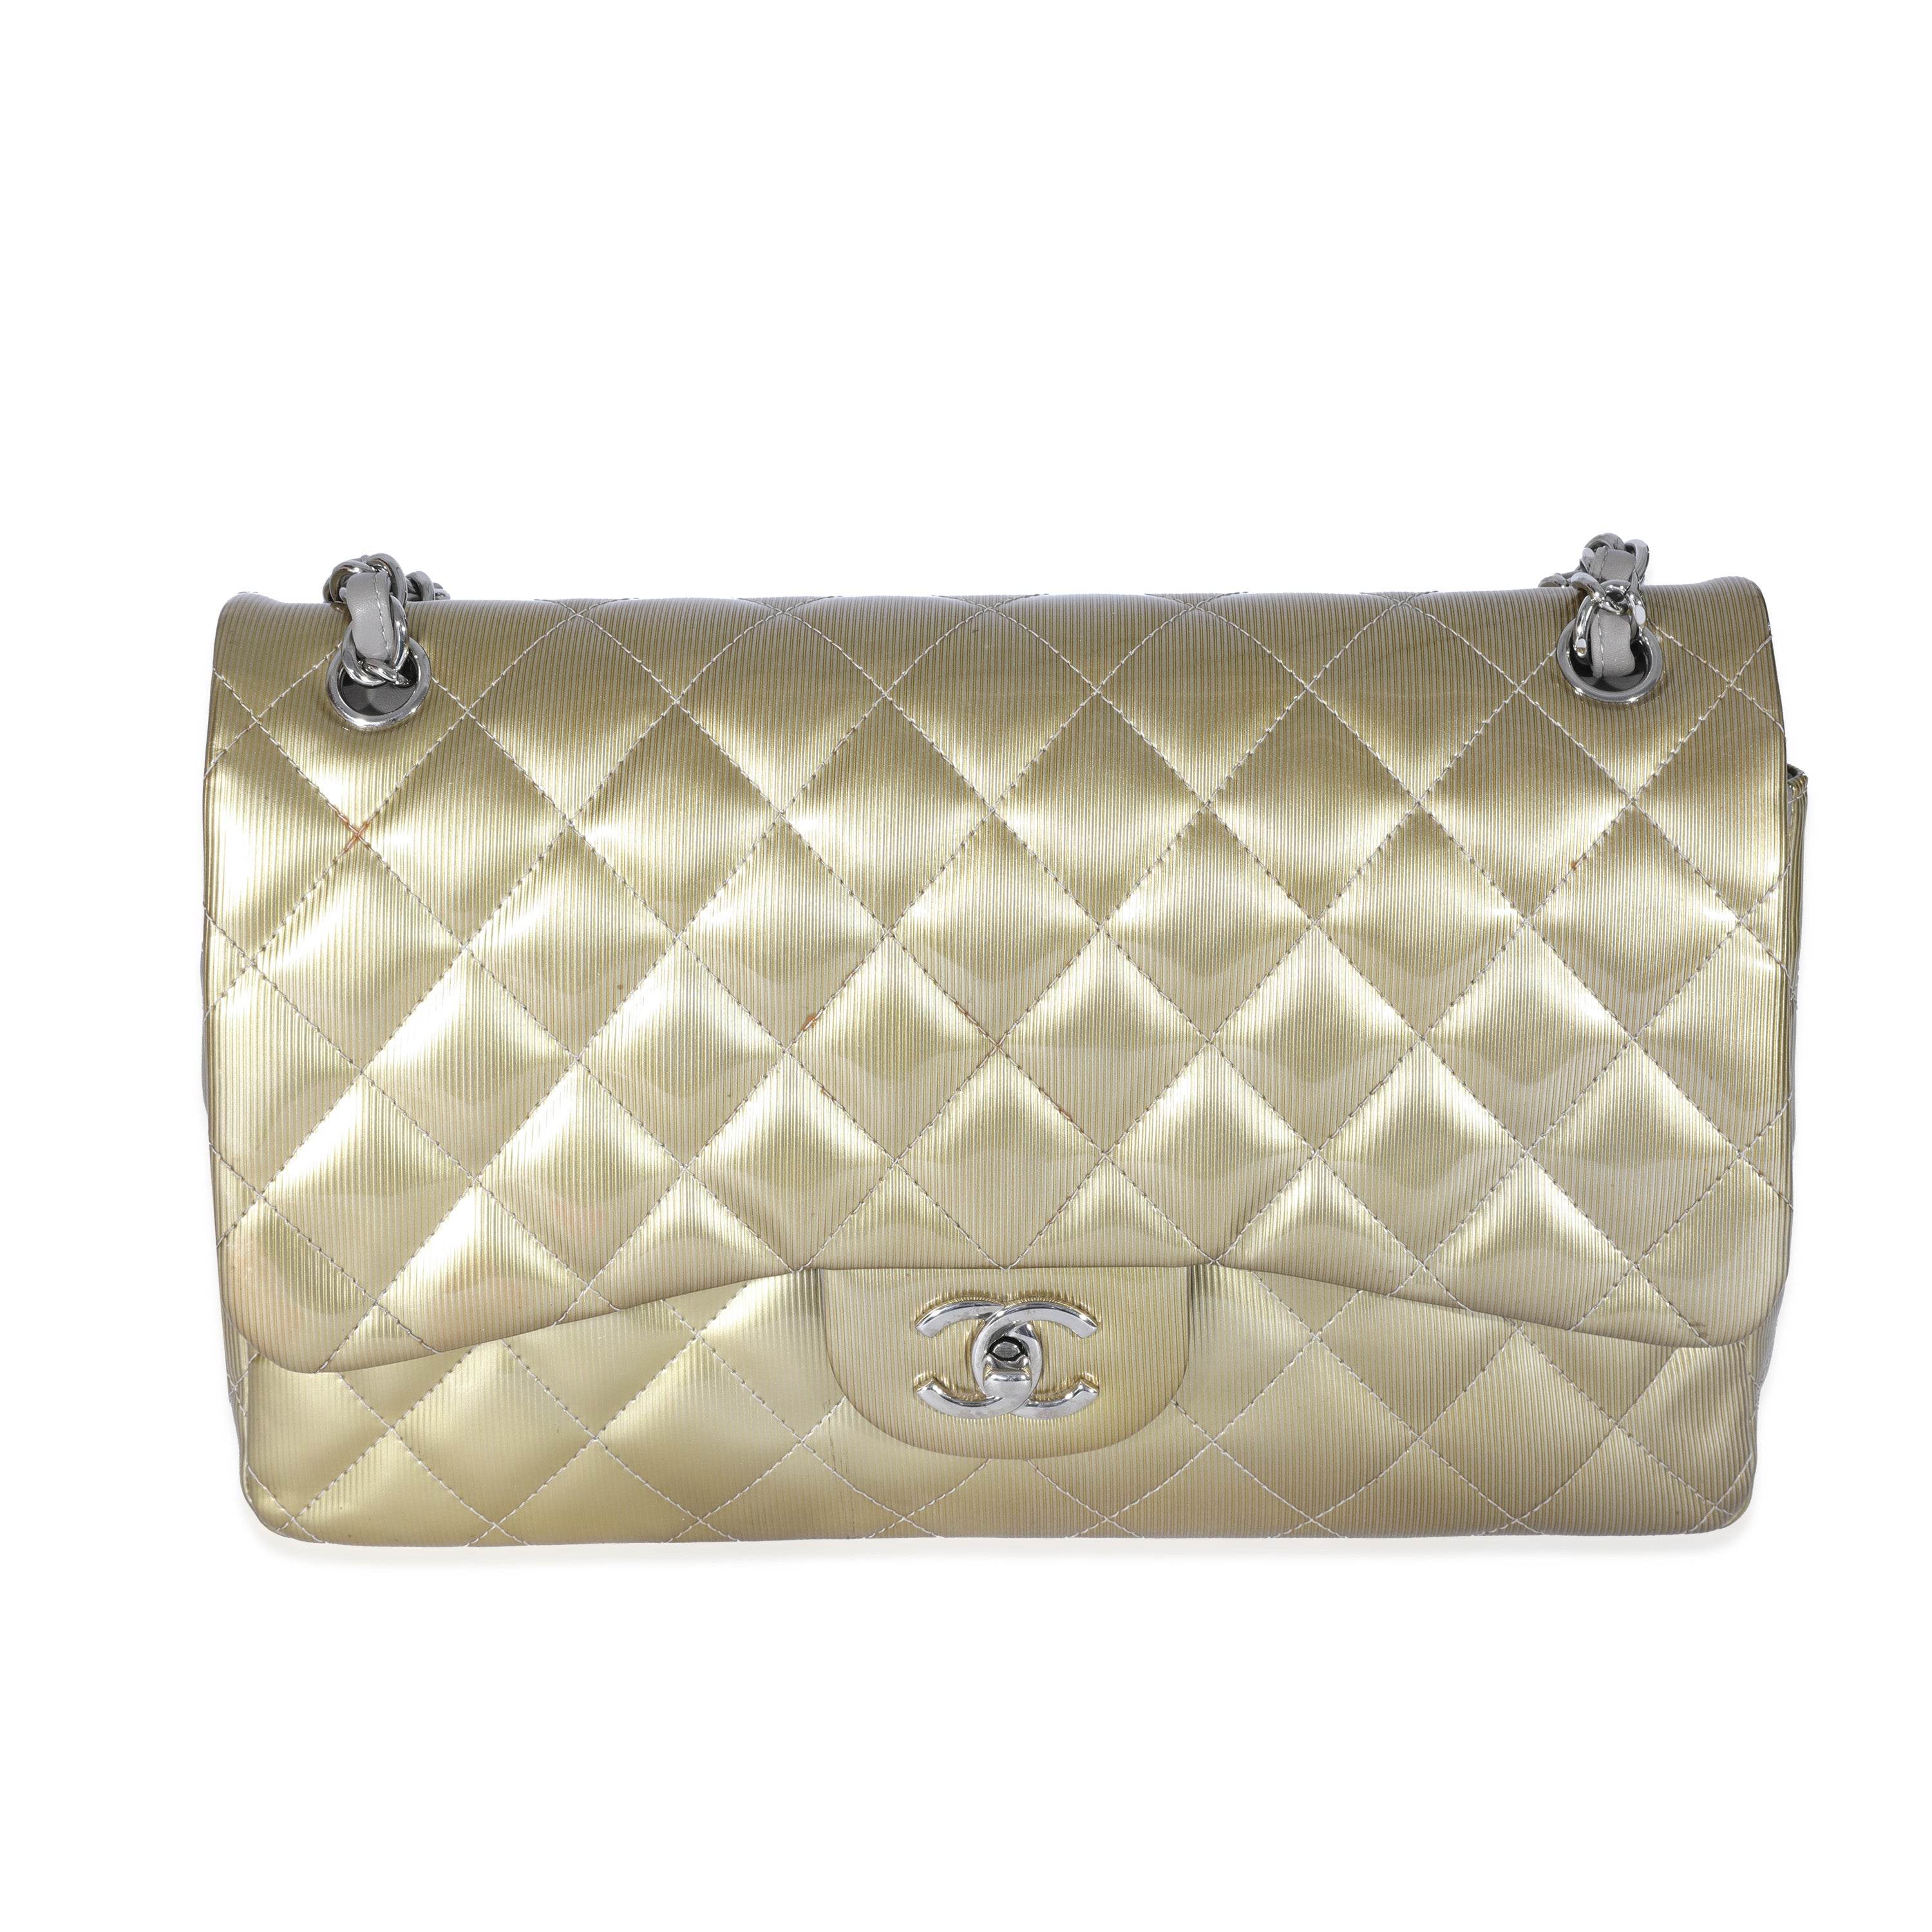 Chanel Orange Quilted Patent Leather Jumbo Double Flap Bag, myGemma, NZ